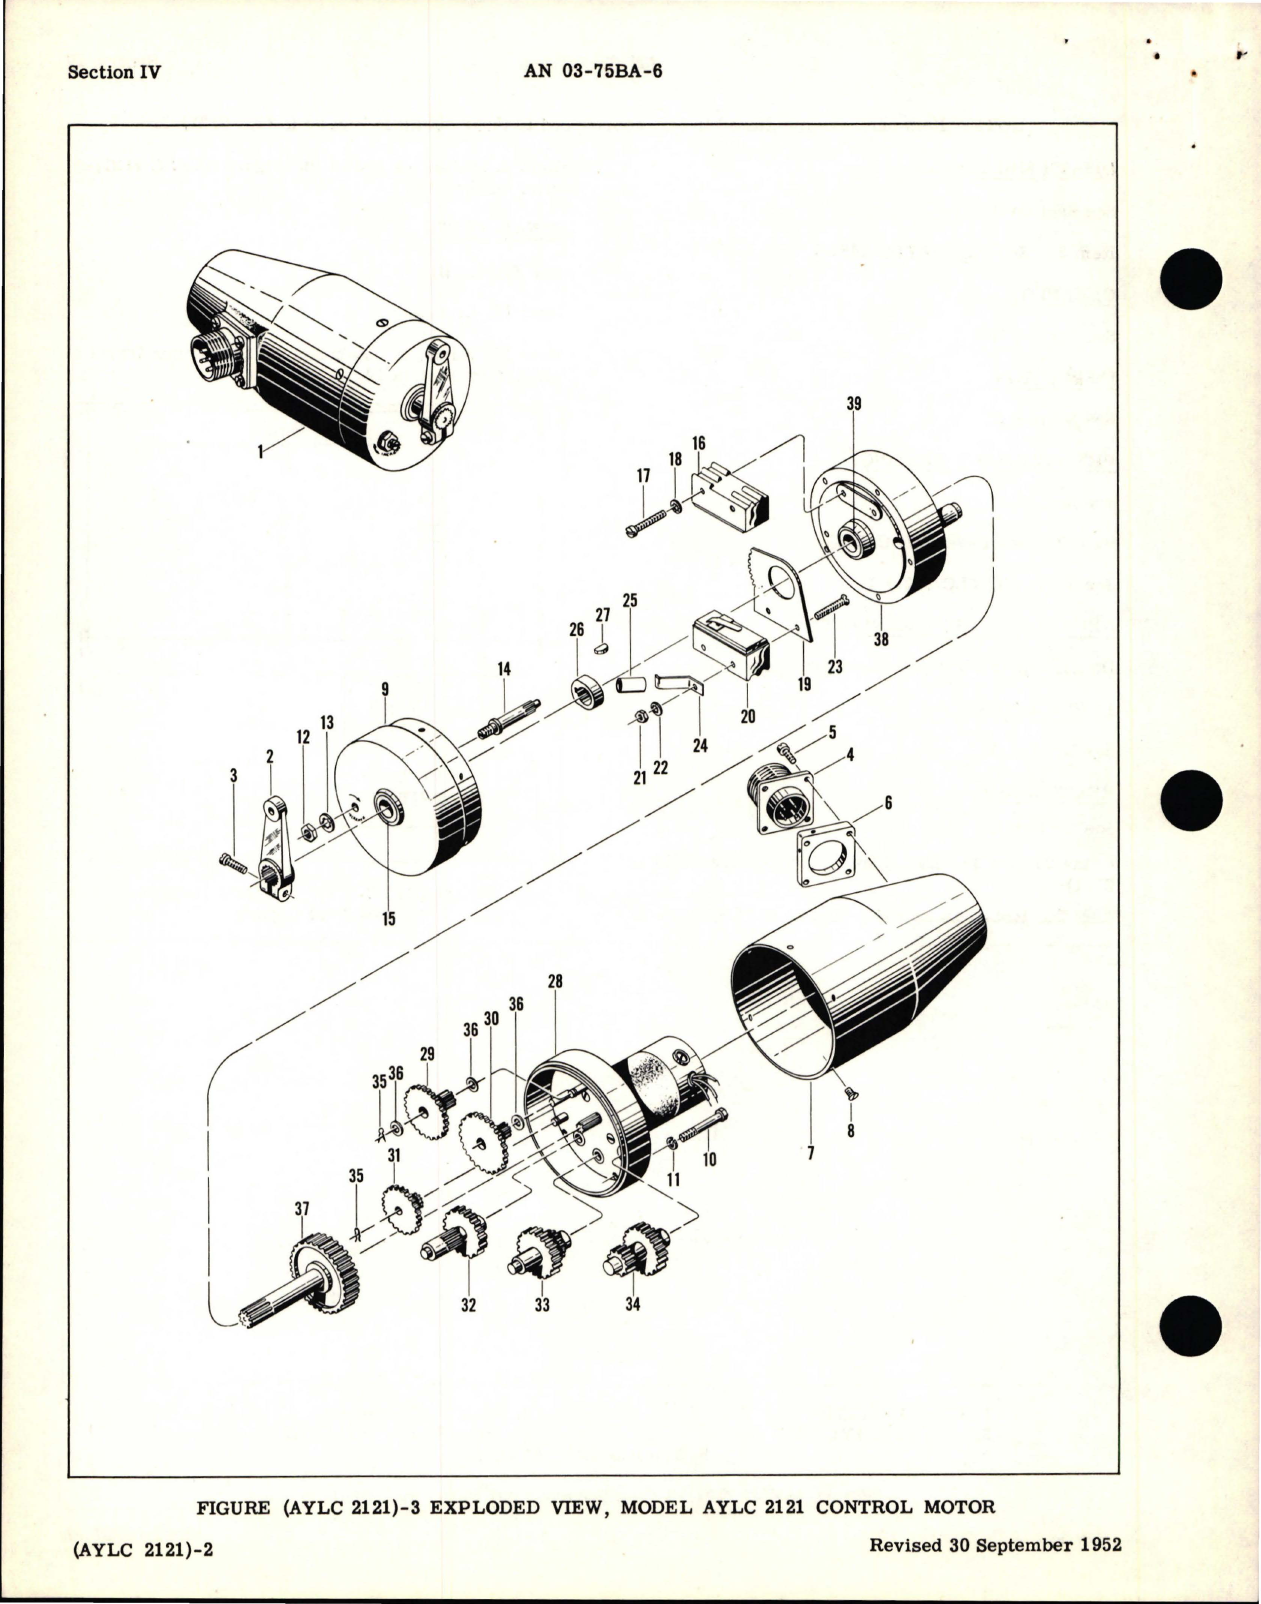 Sample page 6 from AirCorps Library document: Overhaul Instructions for Control Motors - Part AYLC Series 